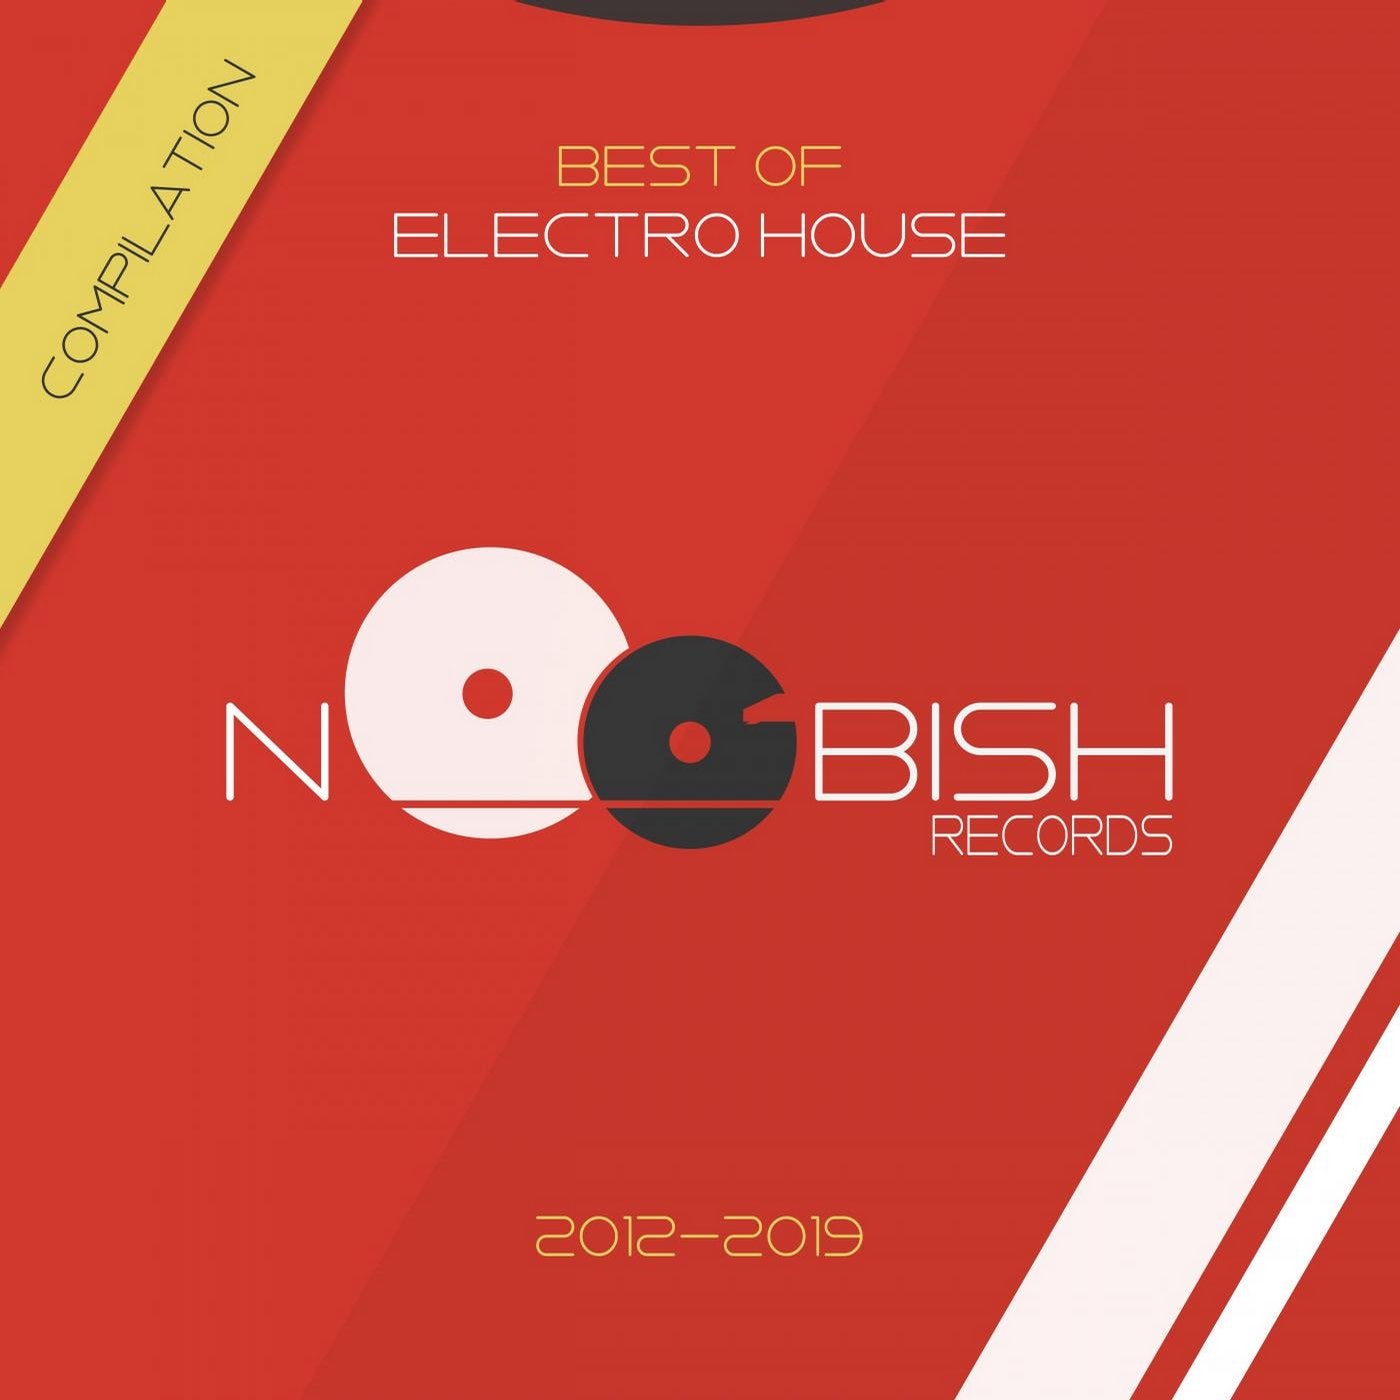 Best Of Electro House 2012 - 2019